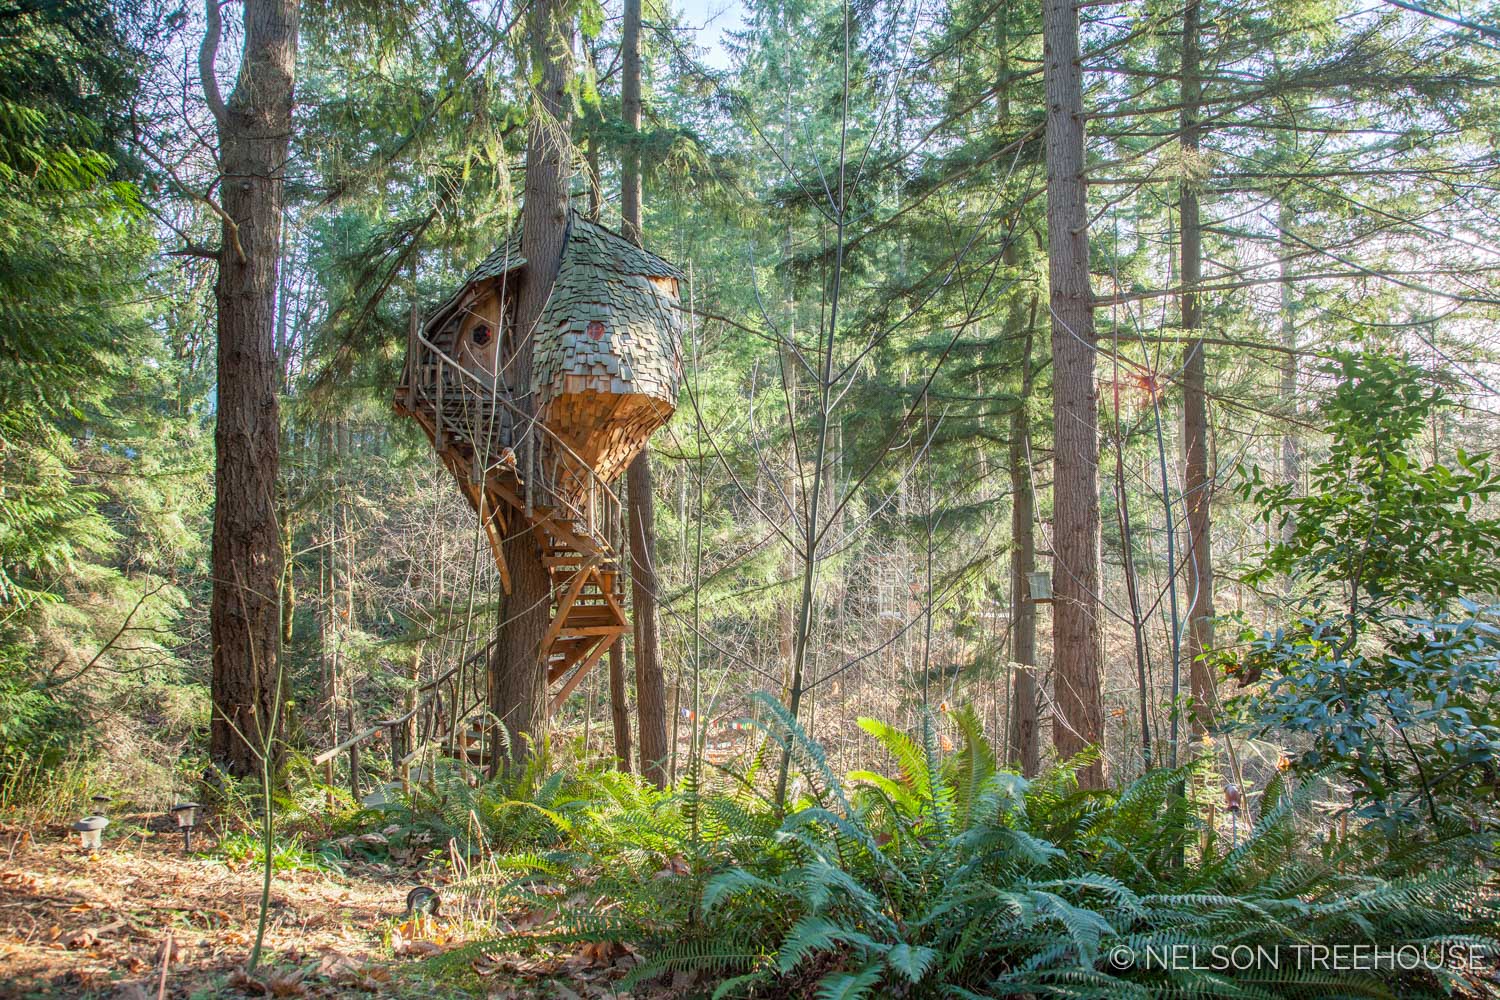  Beehive Treehouse in the forest 